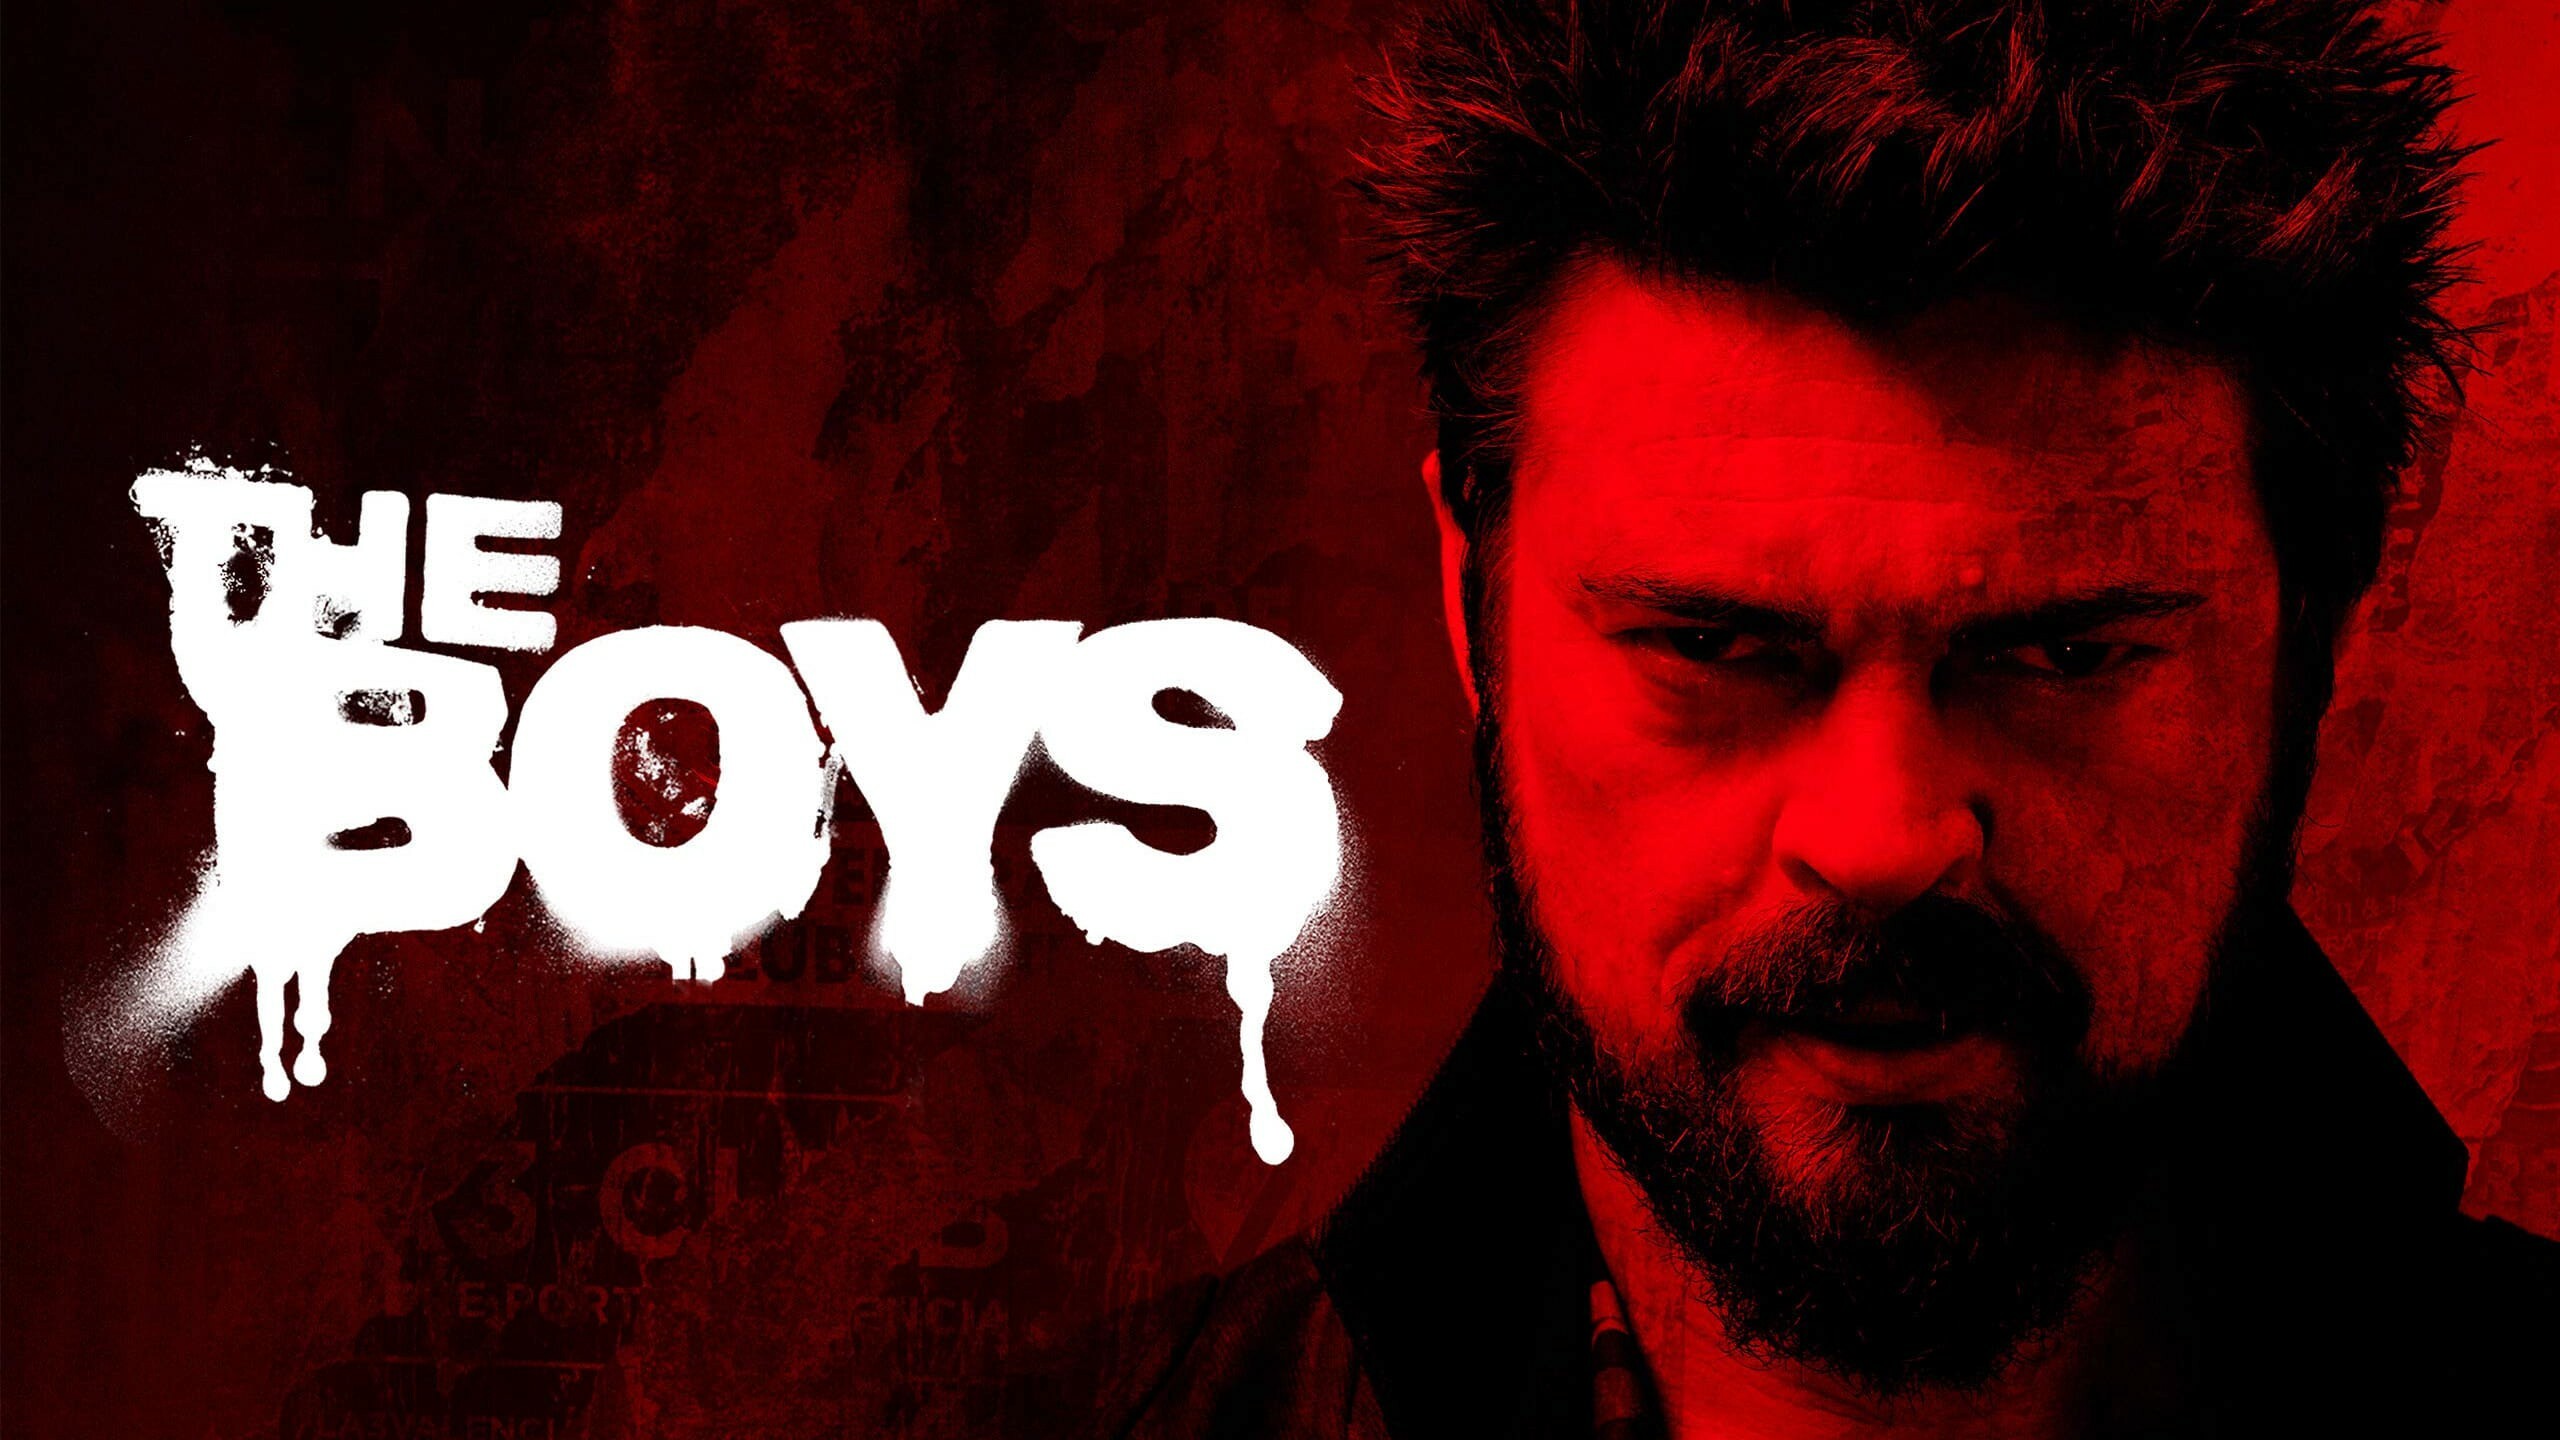 The Boys: The story examines the nature of power and how fame and remarkable ability can corrupt. 2560x1440 HD Background.